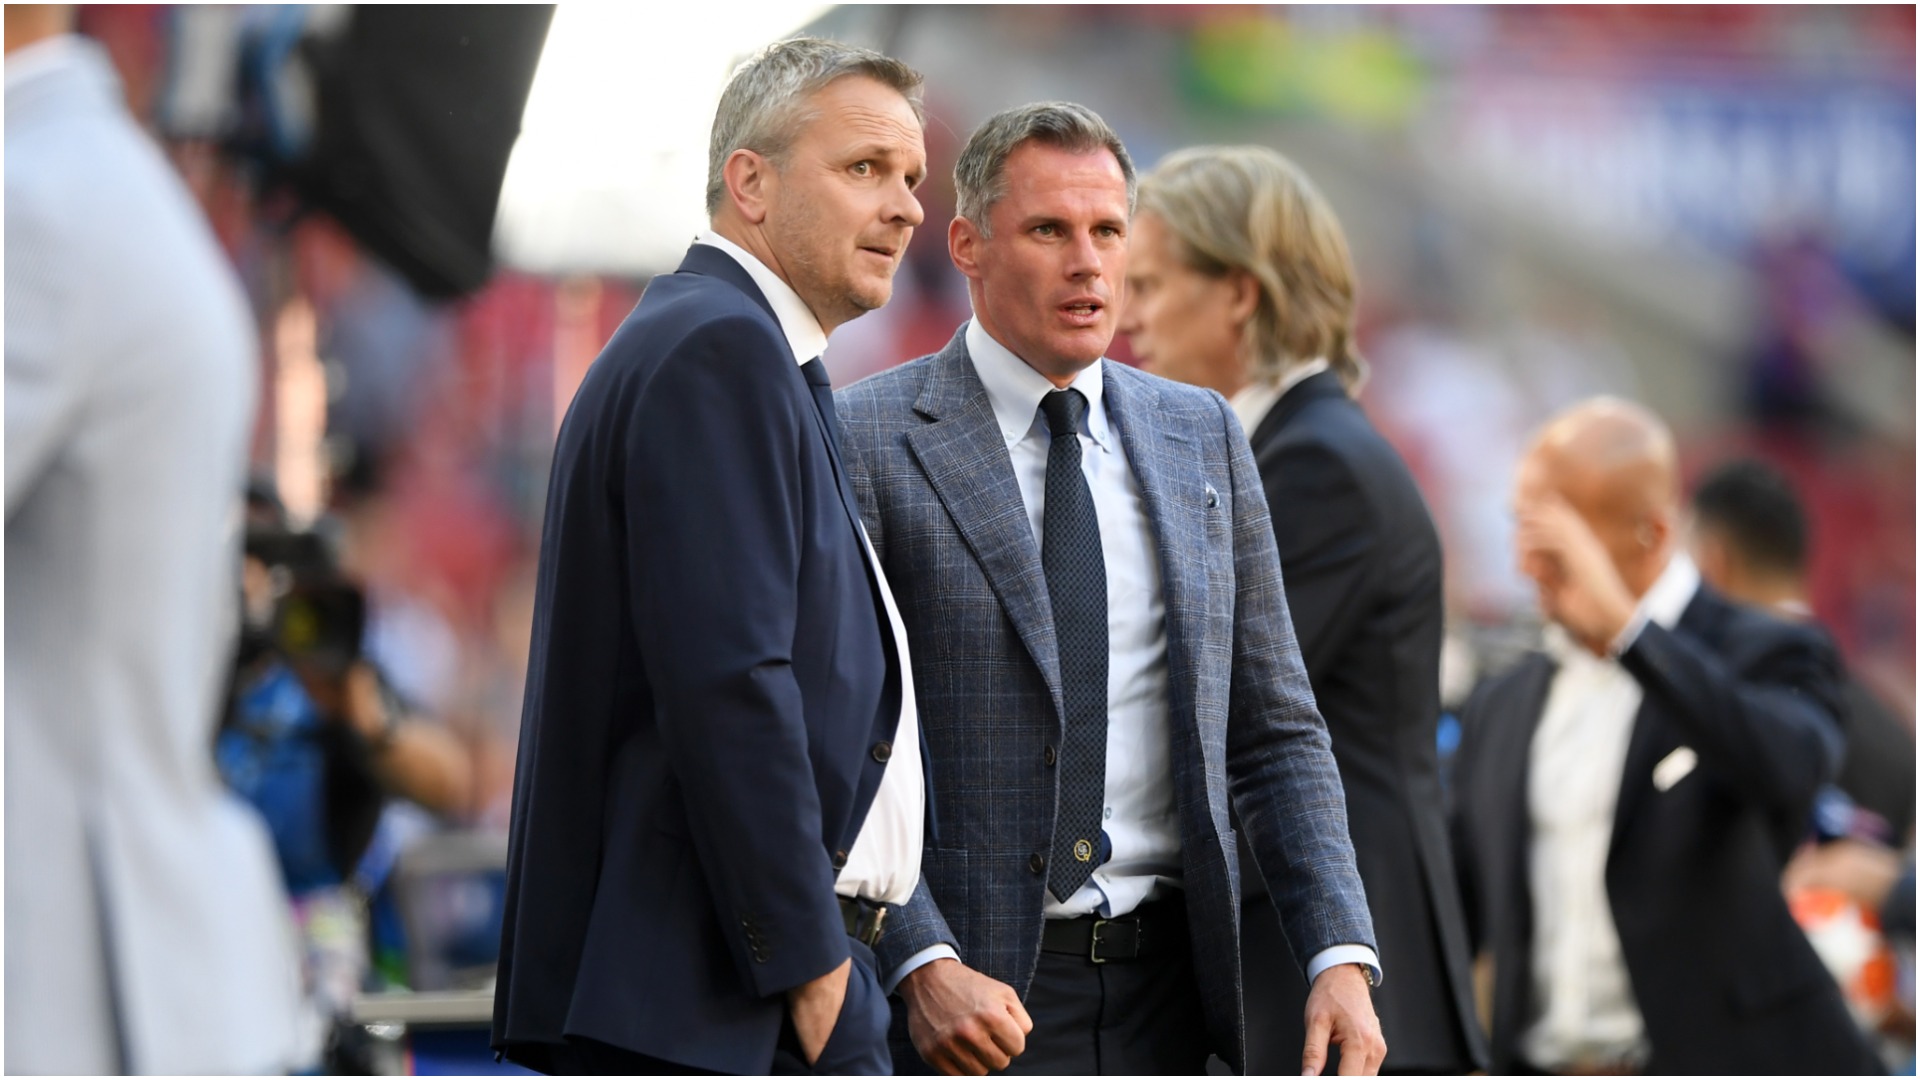 After Jamie Carragher criticised Liverpool's decision to furlough staff, Dietmar Hamann has also hit out at his former club.